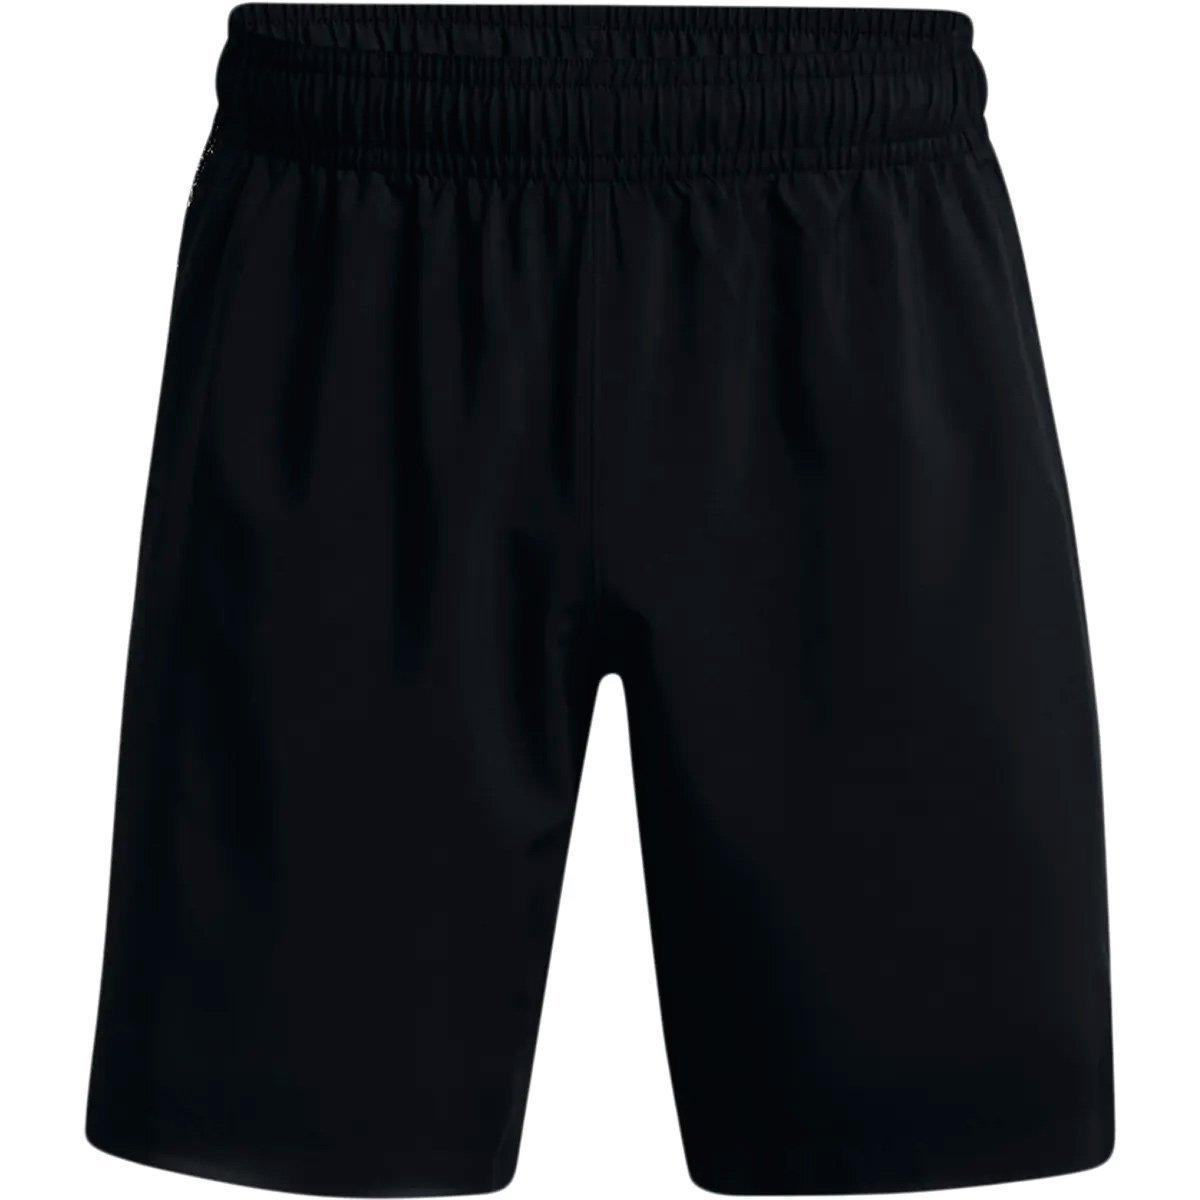 Under Armour Woven Graphic Shorts Herre kr. 279,00,-